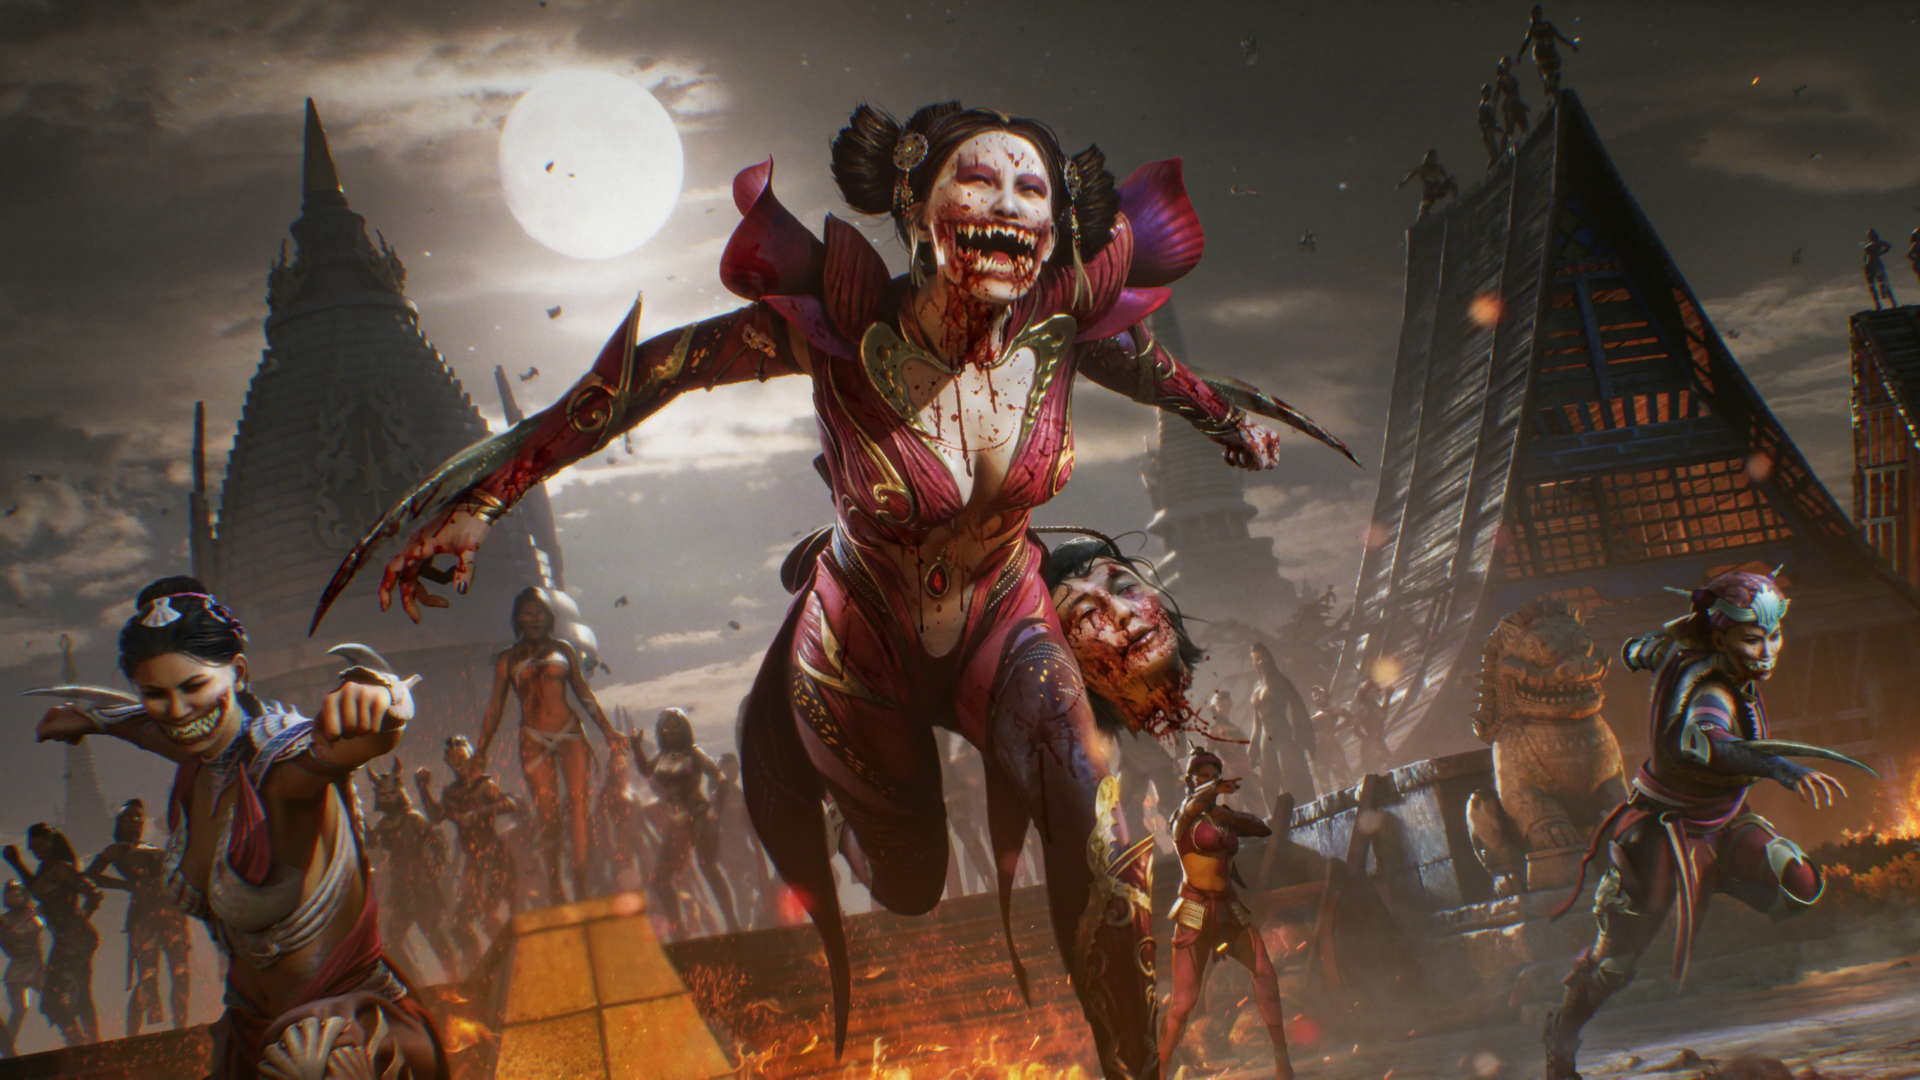 Mortal Kombat 1 Season 4: The Huntress Released With New Trailer – Peacemaker Available Now For Kombat Pack Owners Alongside Krossplay Update